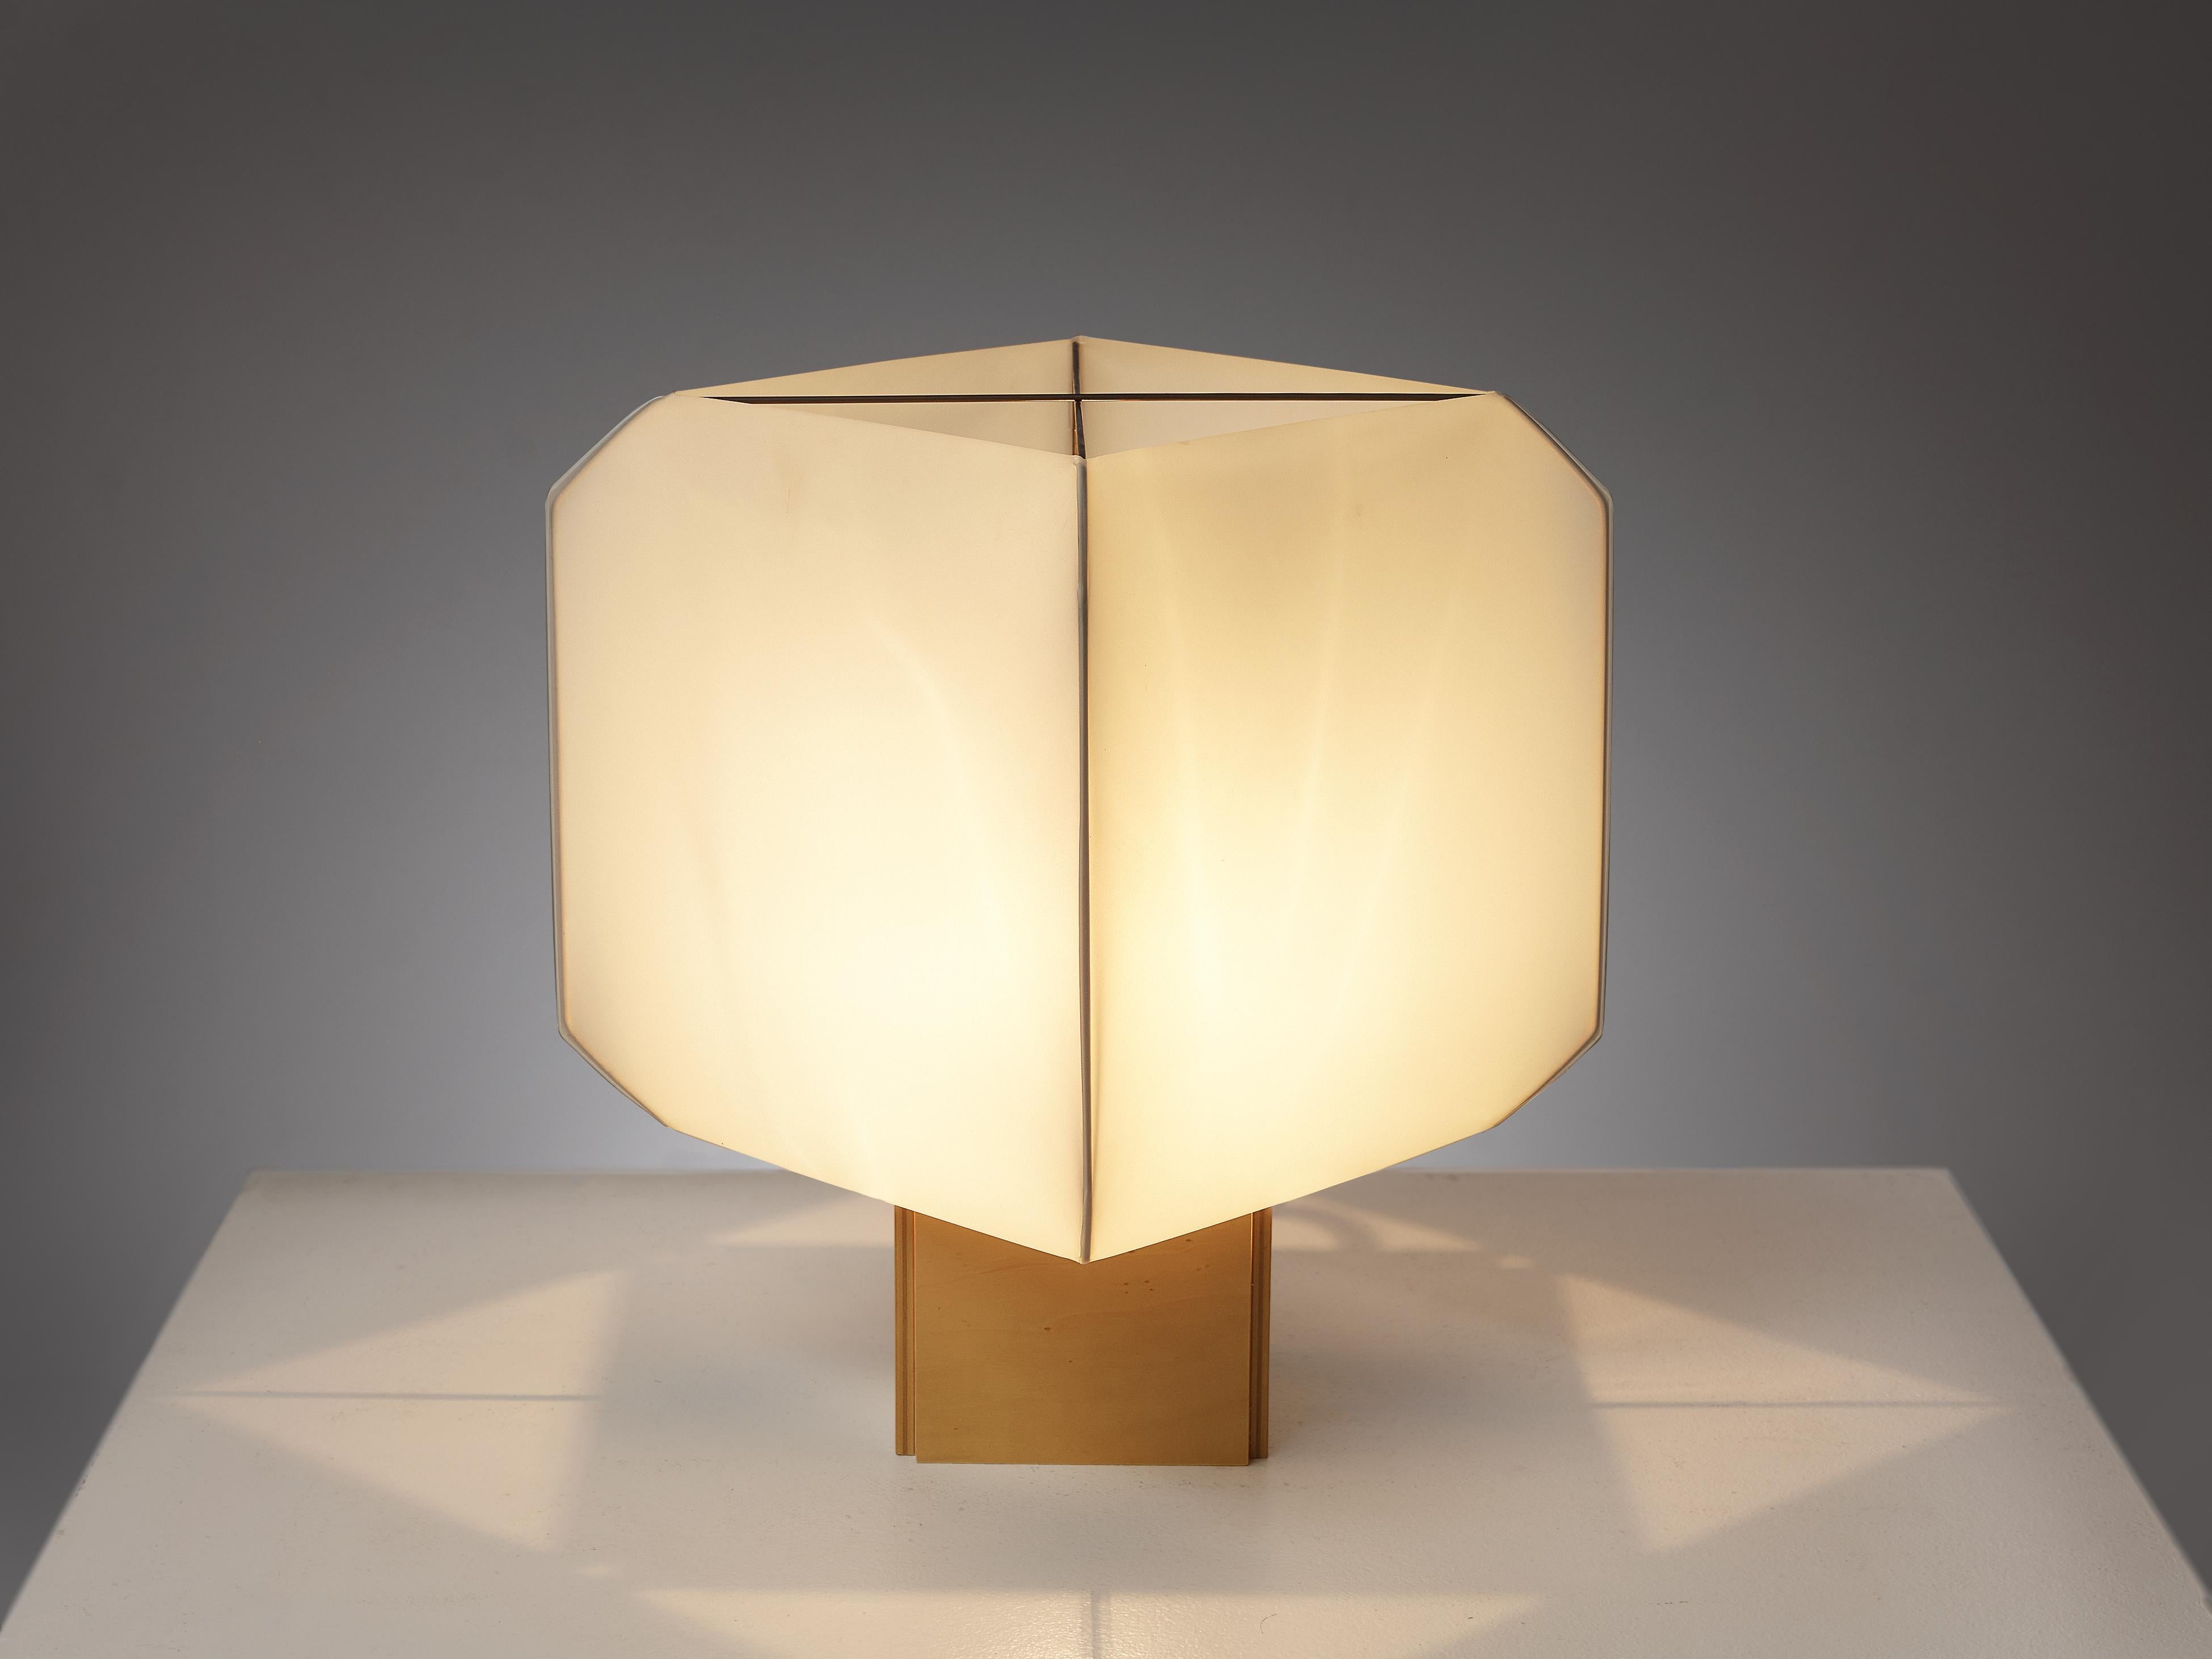 Bruno Munari for Danese, table lamp 'Bali', wood, plastic, brass, Italy, 1958

This 'Bali' table lamp by Bruno Munari has a warm light. The white plastic shades that are adjusted on a metal frame create a soft, indirect light. The colour of the